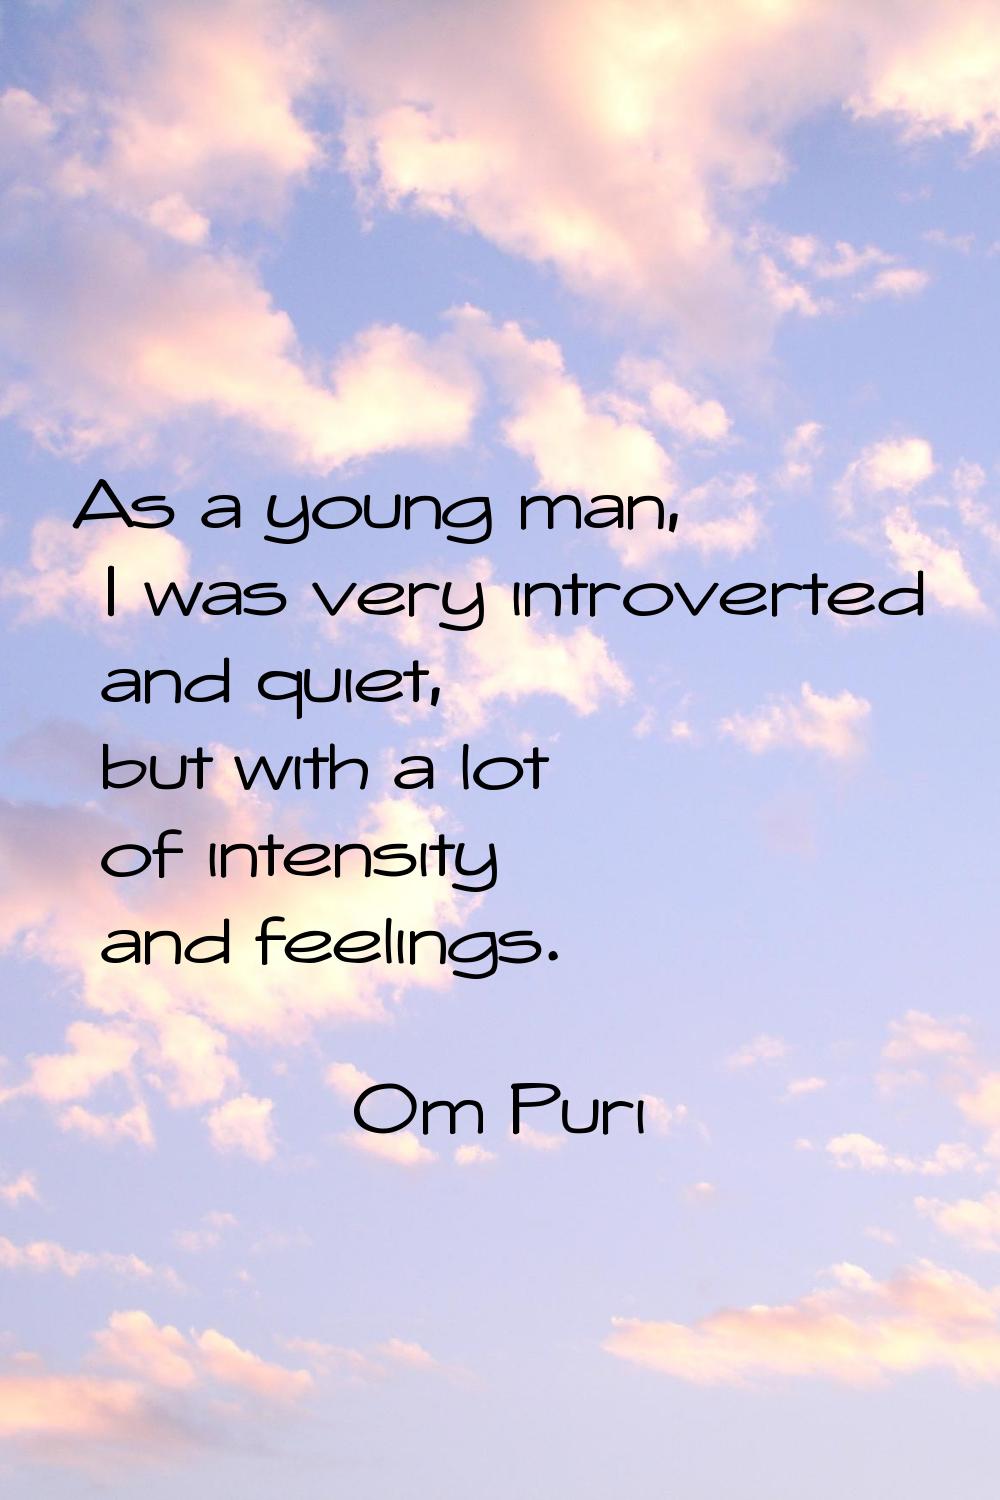 As a young man, I was very introverted and quiet, but with a lot of intensity and feelings.